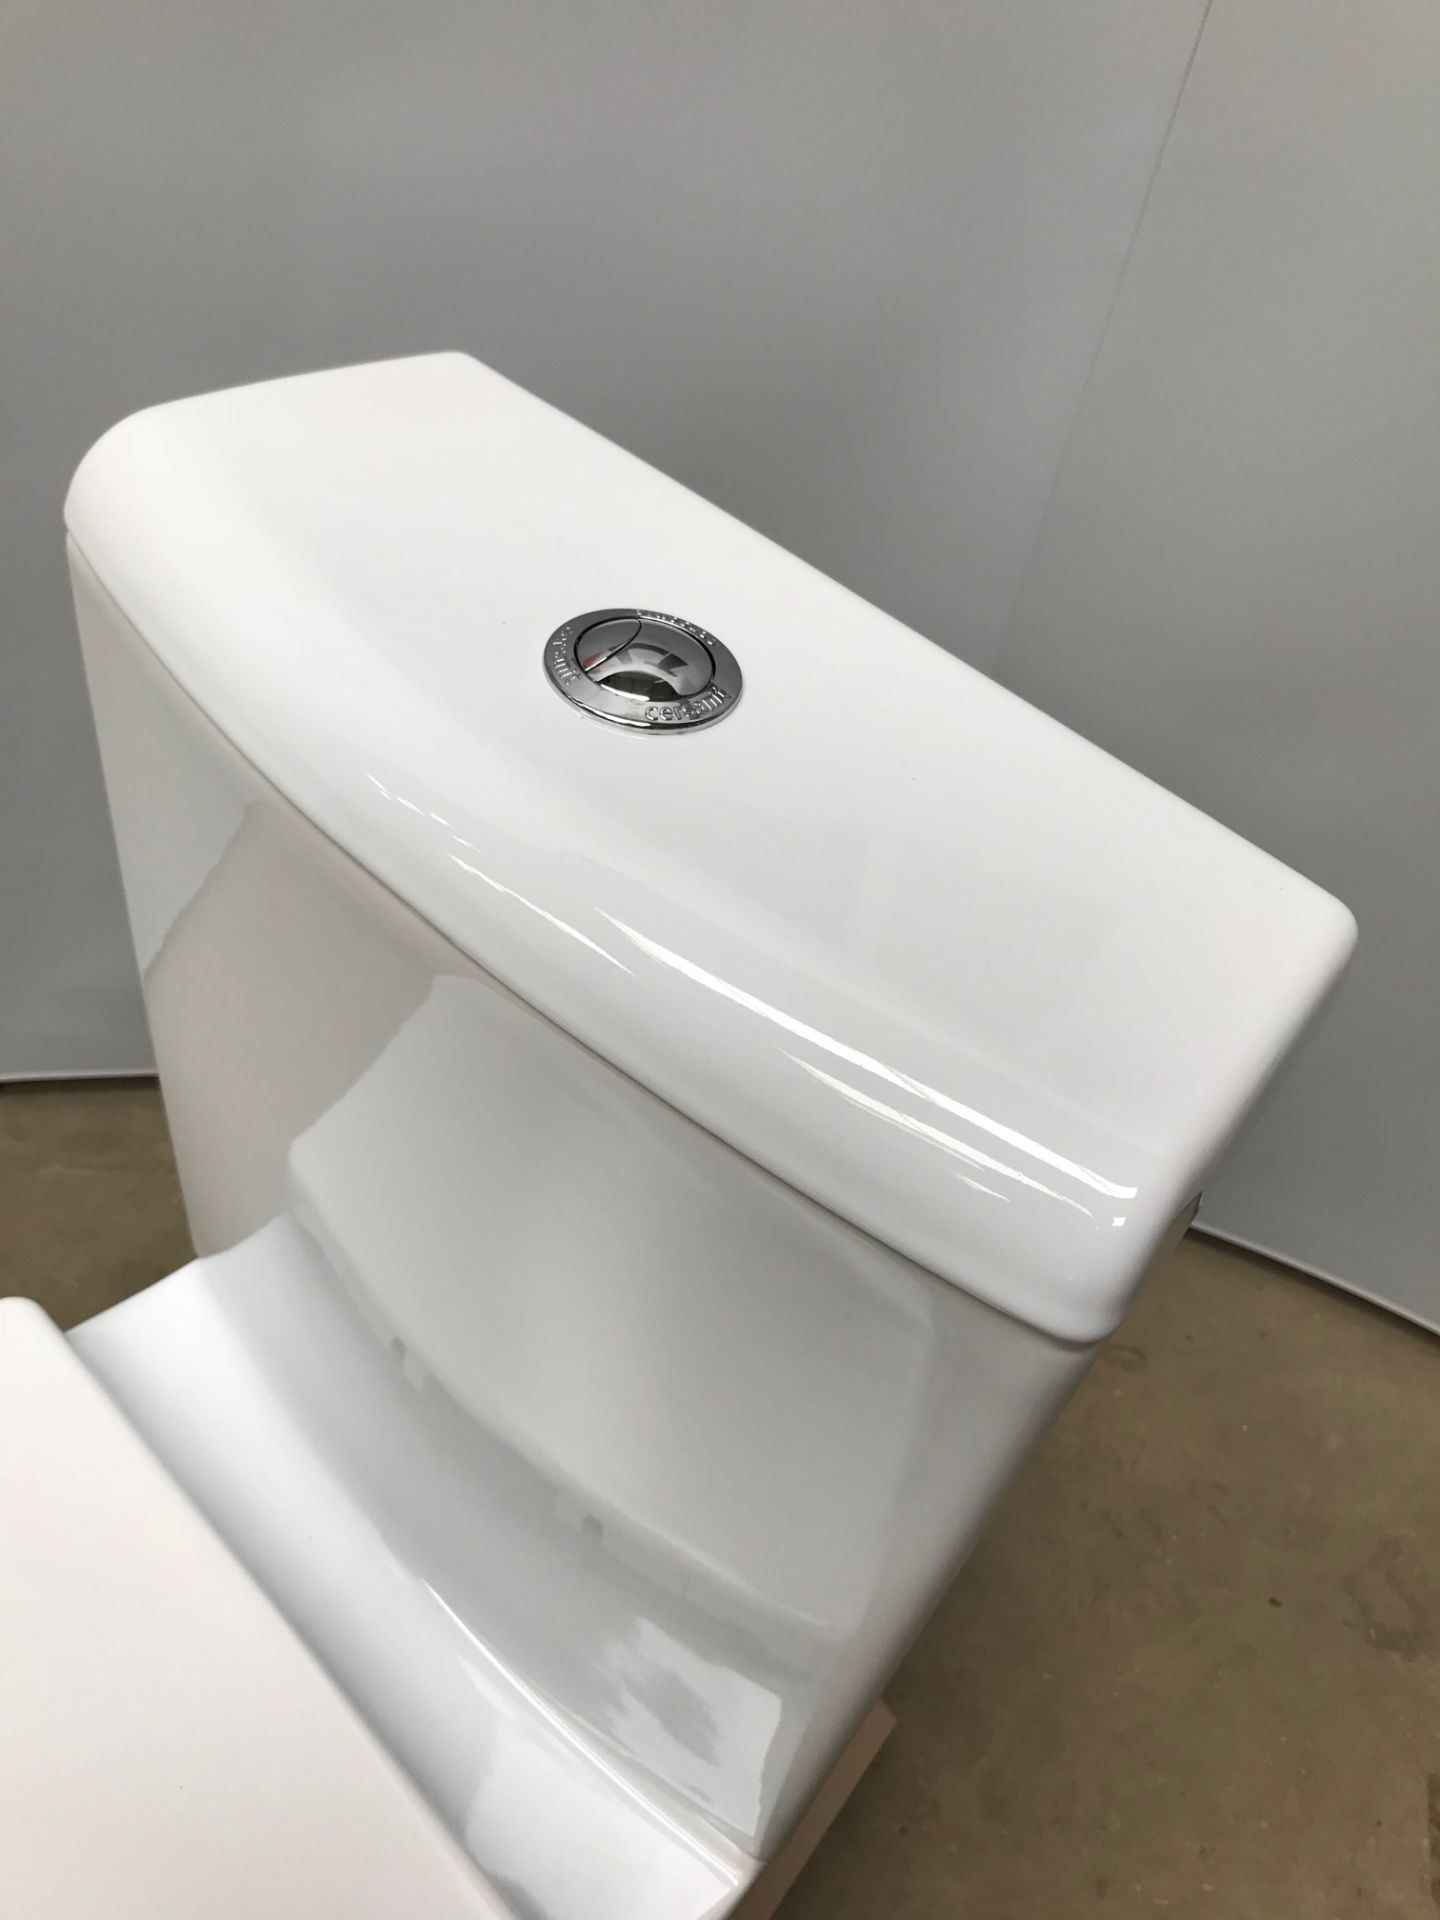 1 x Navassa Close Coupled Toilet with Soft Closing Seat - Image 4 of 7